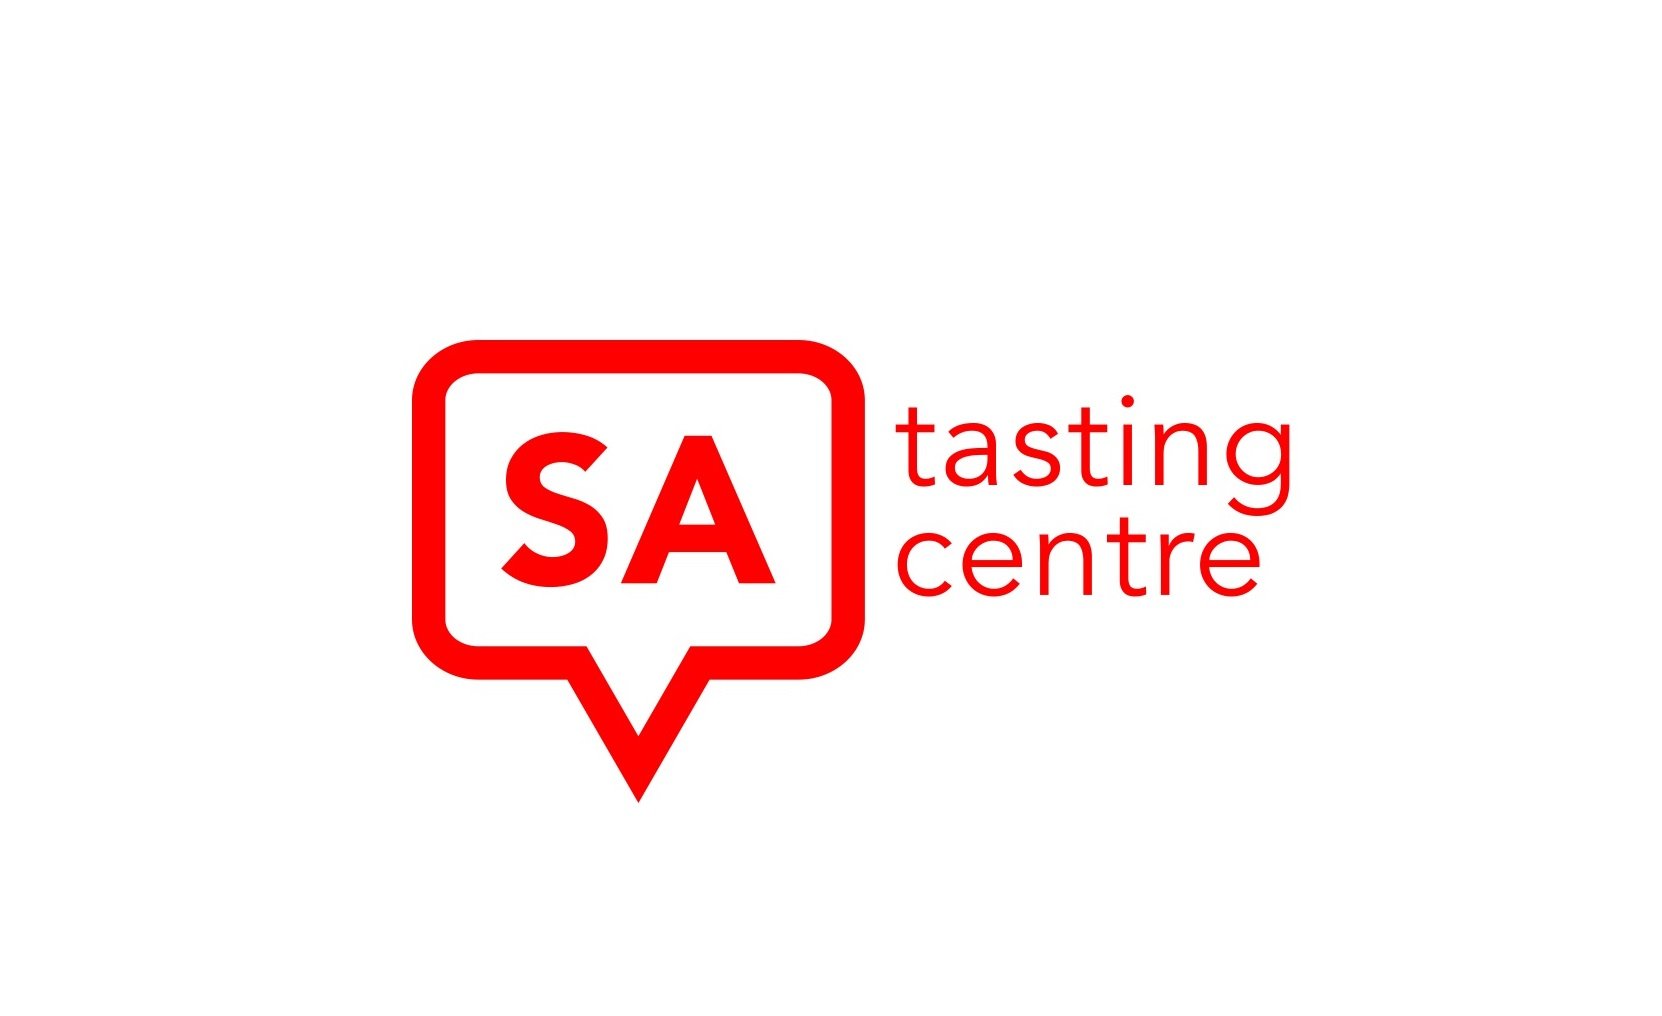 Supporting SA producers from the wine, beer/cider, spirits and artisan food industries. Retail, tourism and commercial trader. Drink, eat, explore!